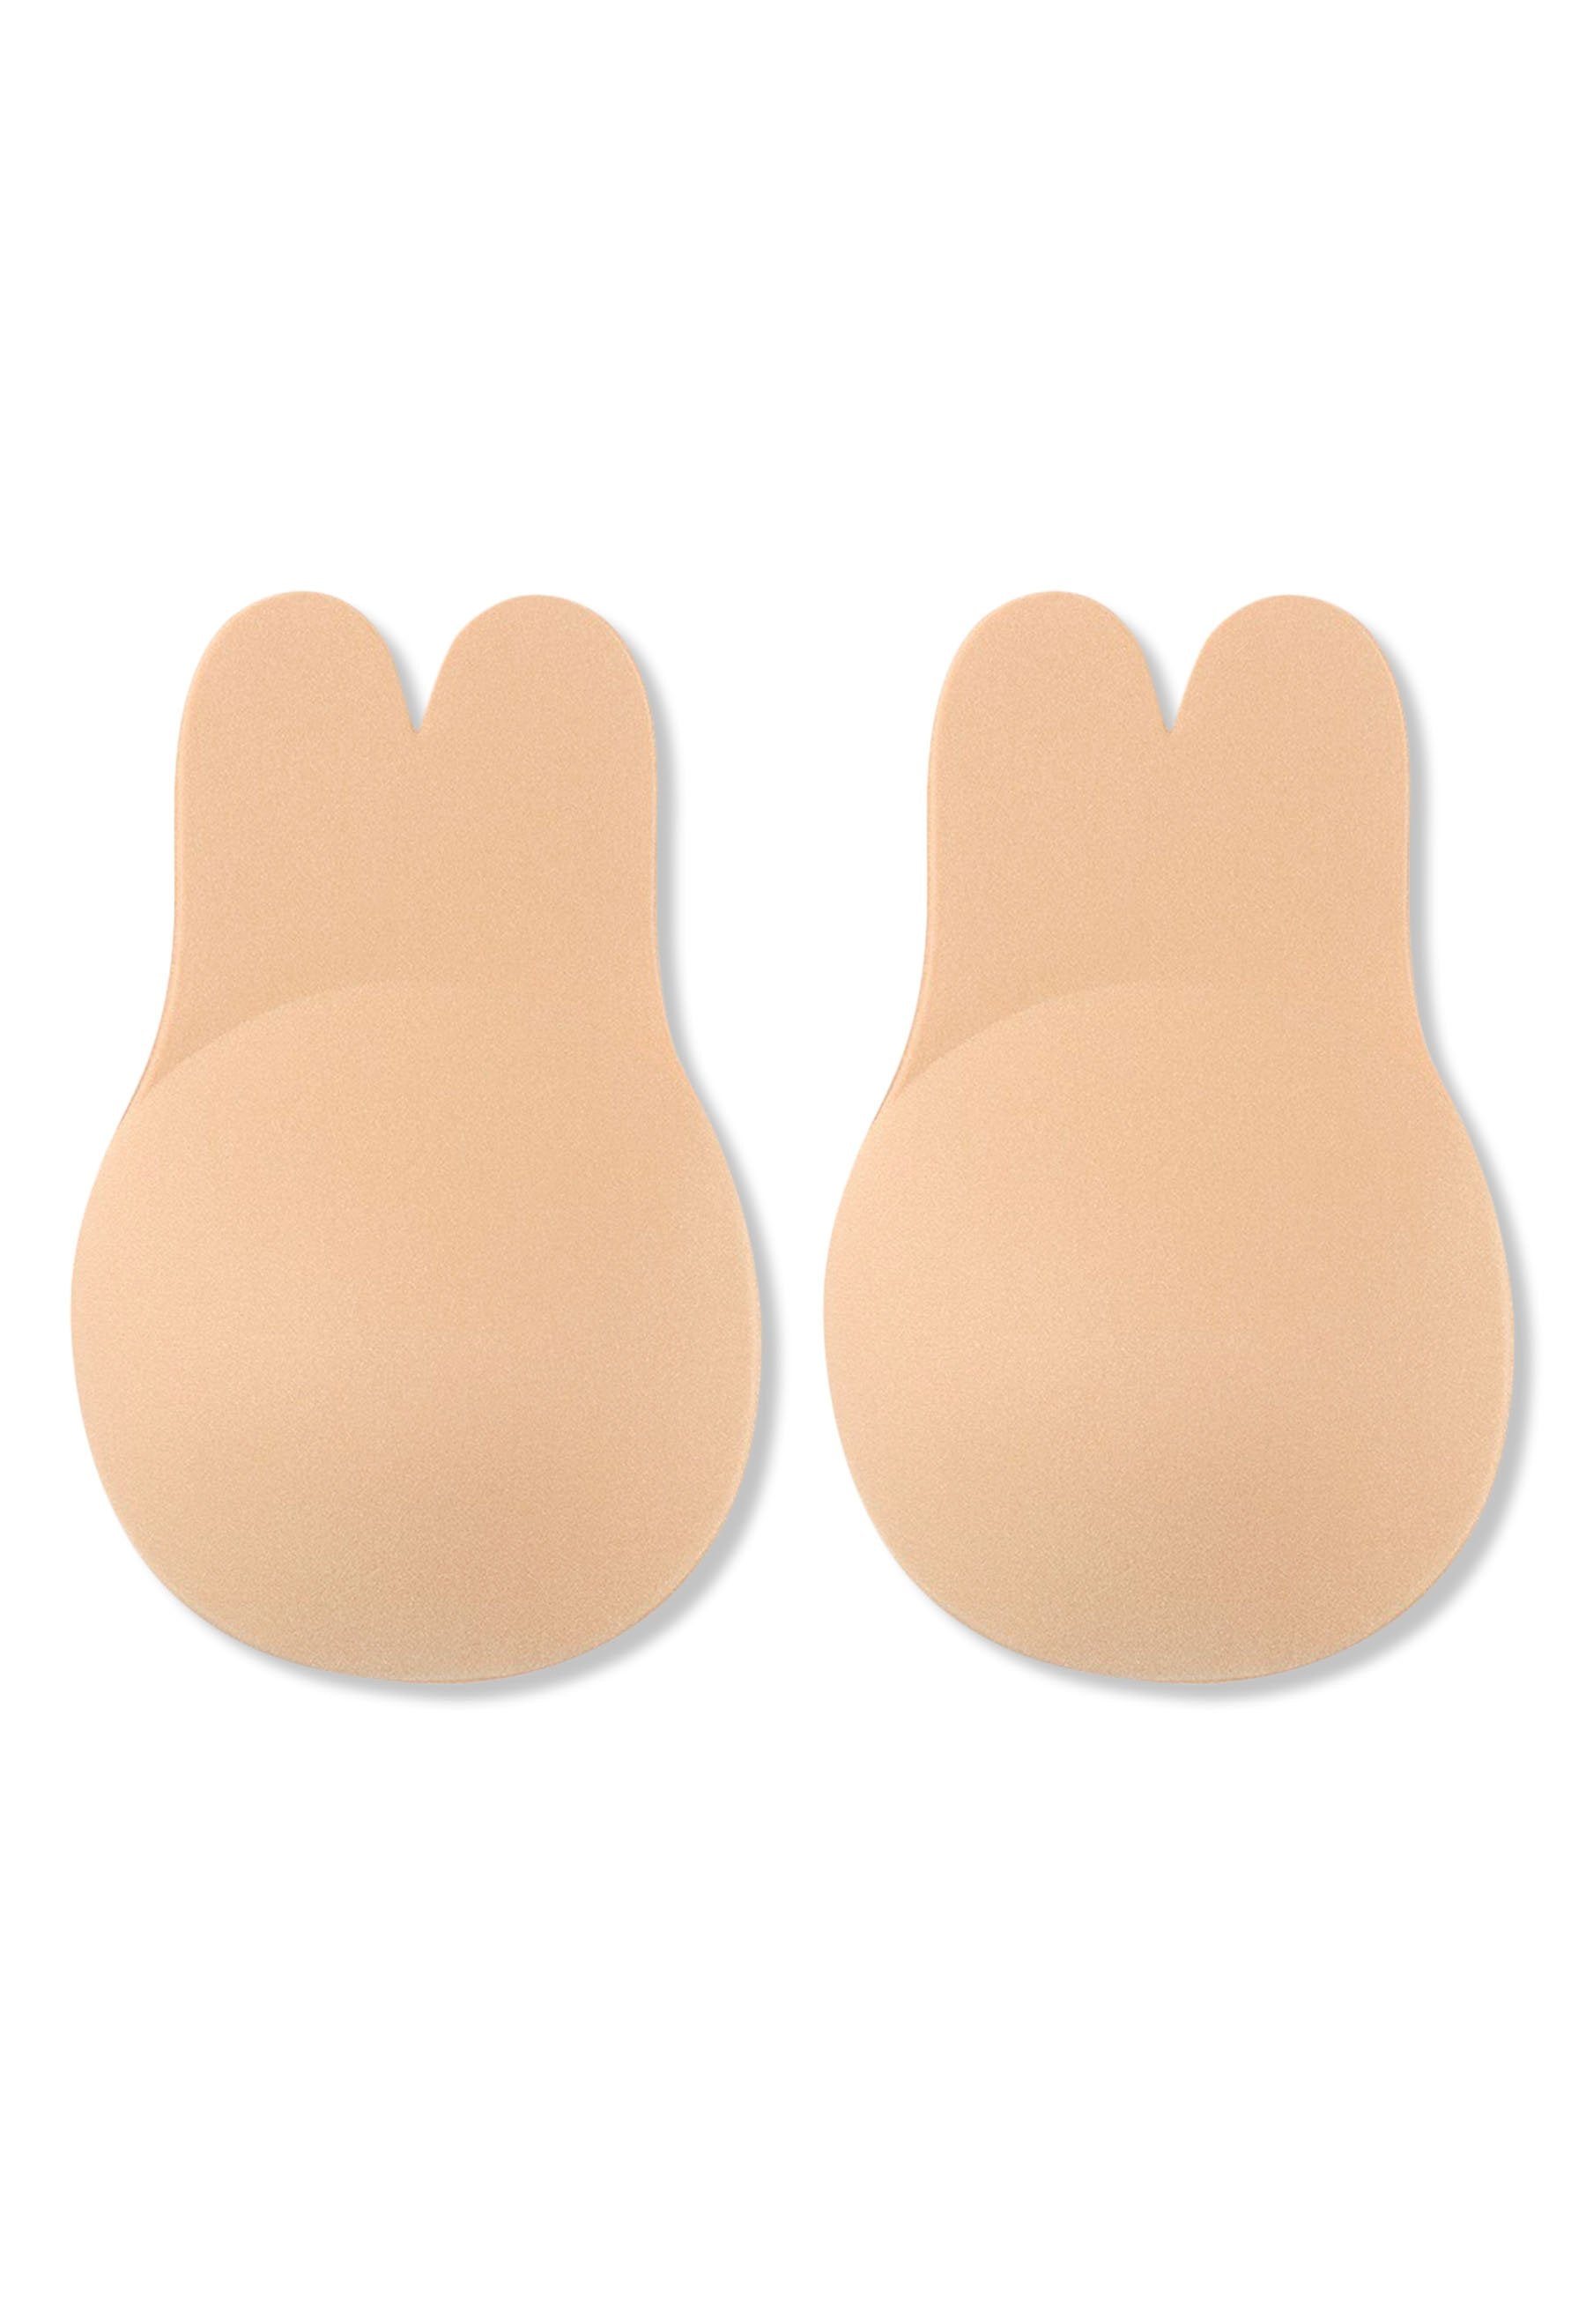 Adhesive Bunny Lift Cups